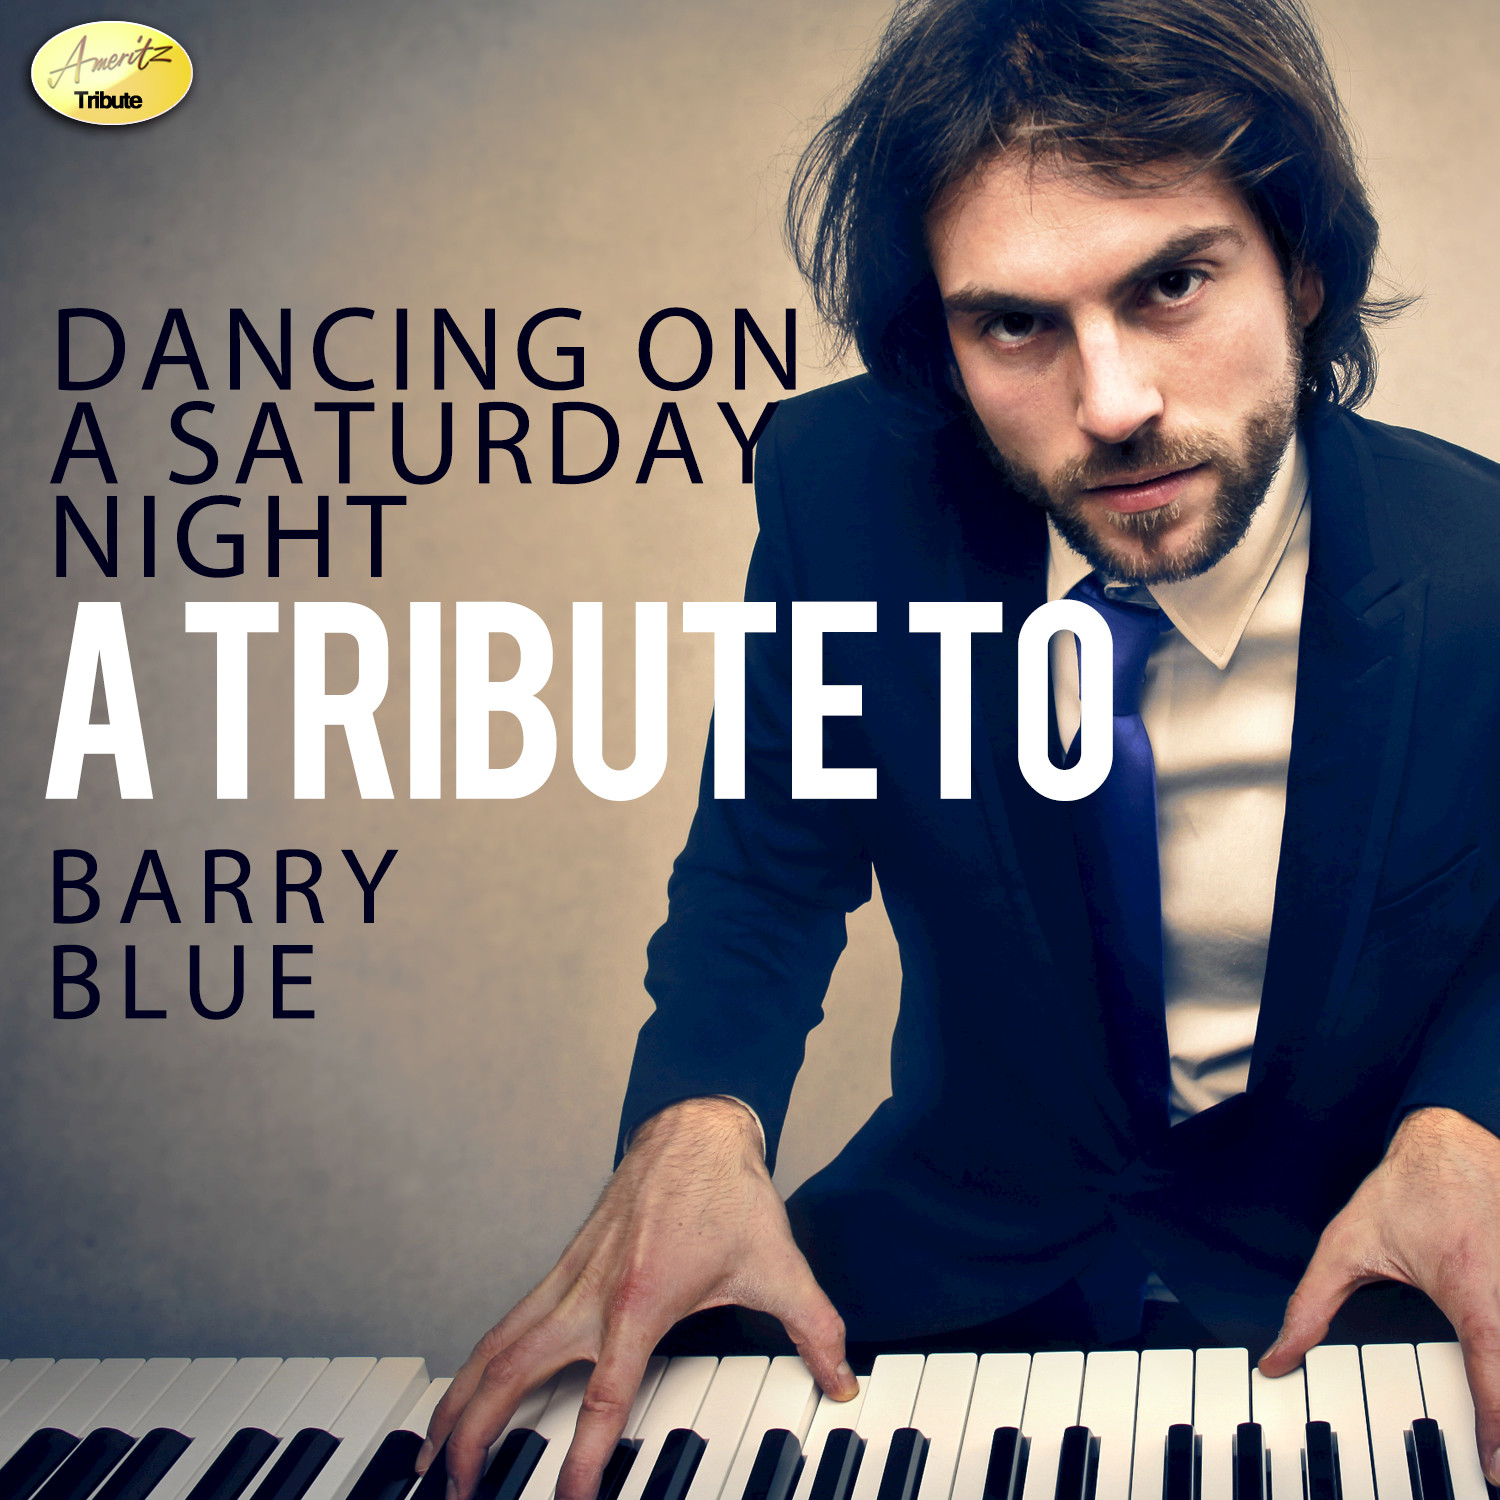 Dancing On a Saturday Night - A Tribute to Barry Blue